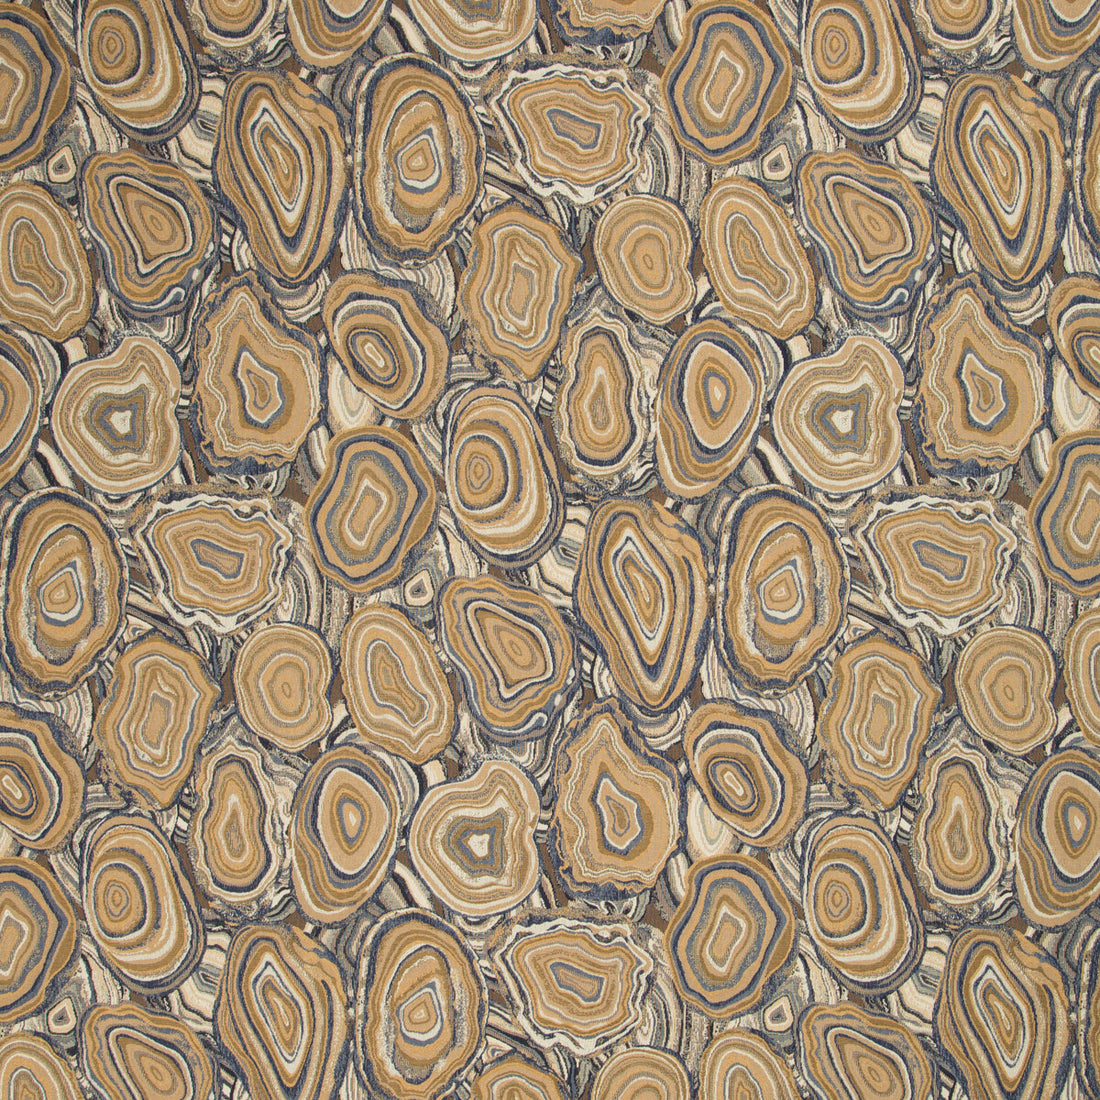 Kravet Design fabric in 34707-615 color - pattern 34707.615.0 - by Kravet Design in the Performance Crypton Home collection